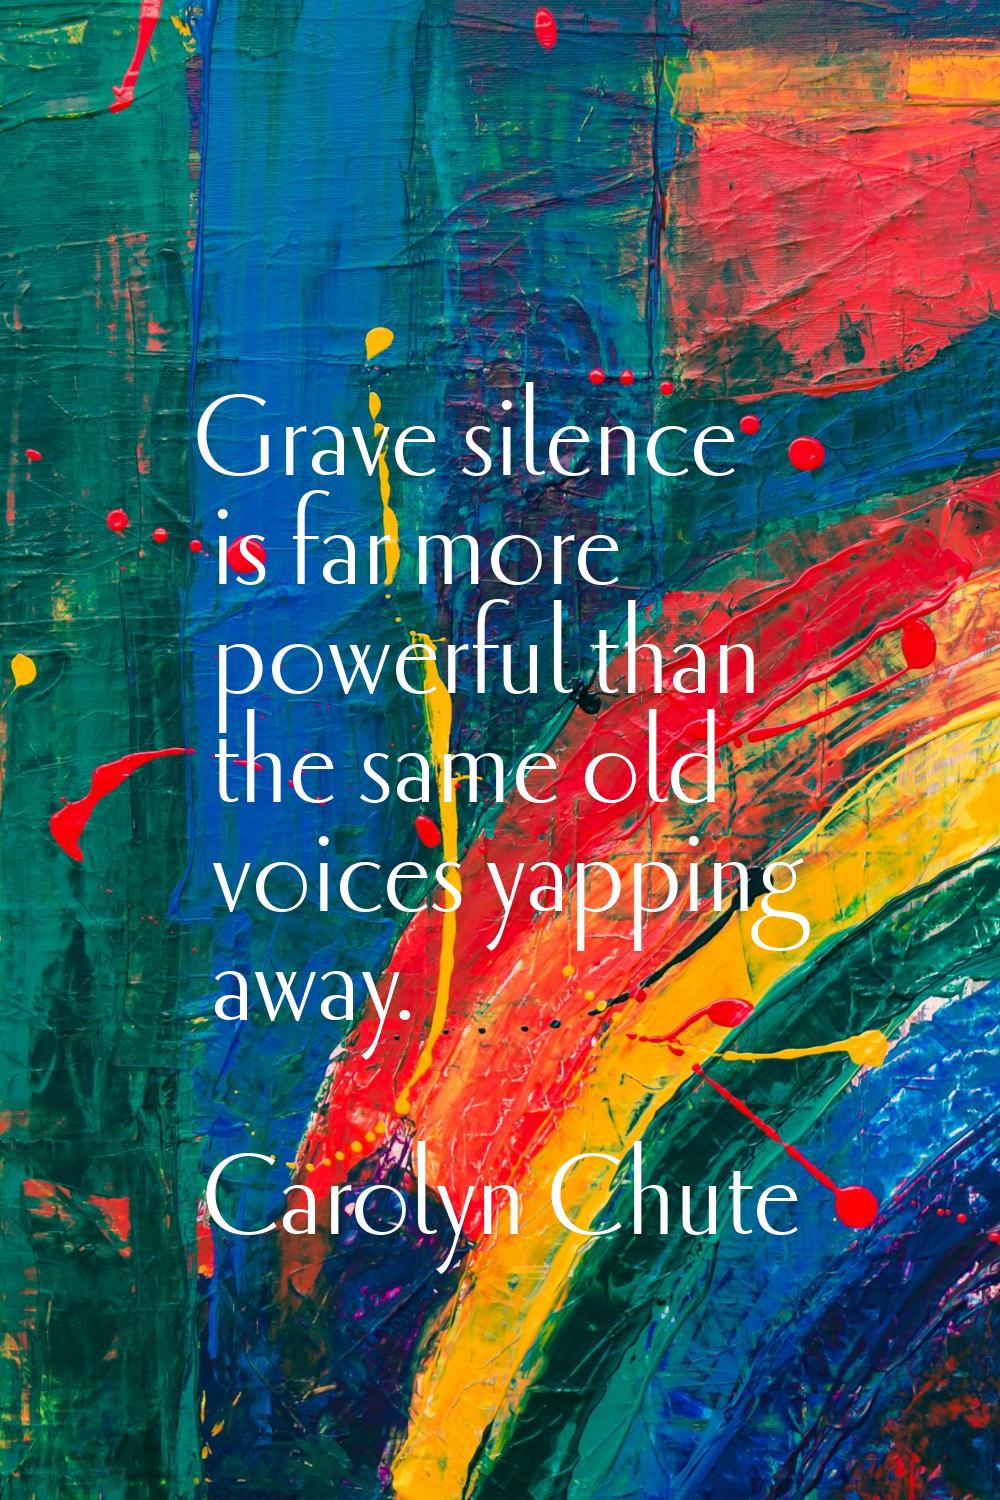 Grave silence is far more powerful than the same old voices yapping away.